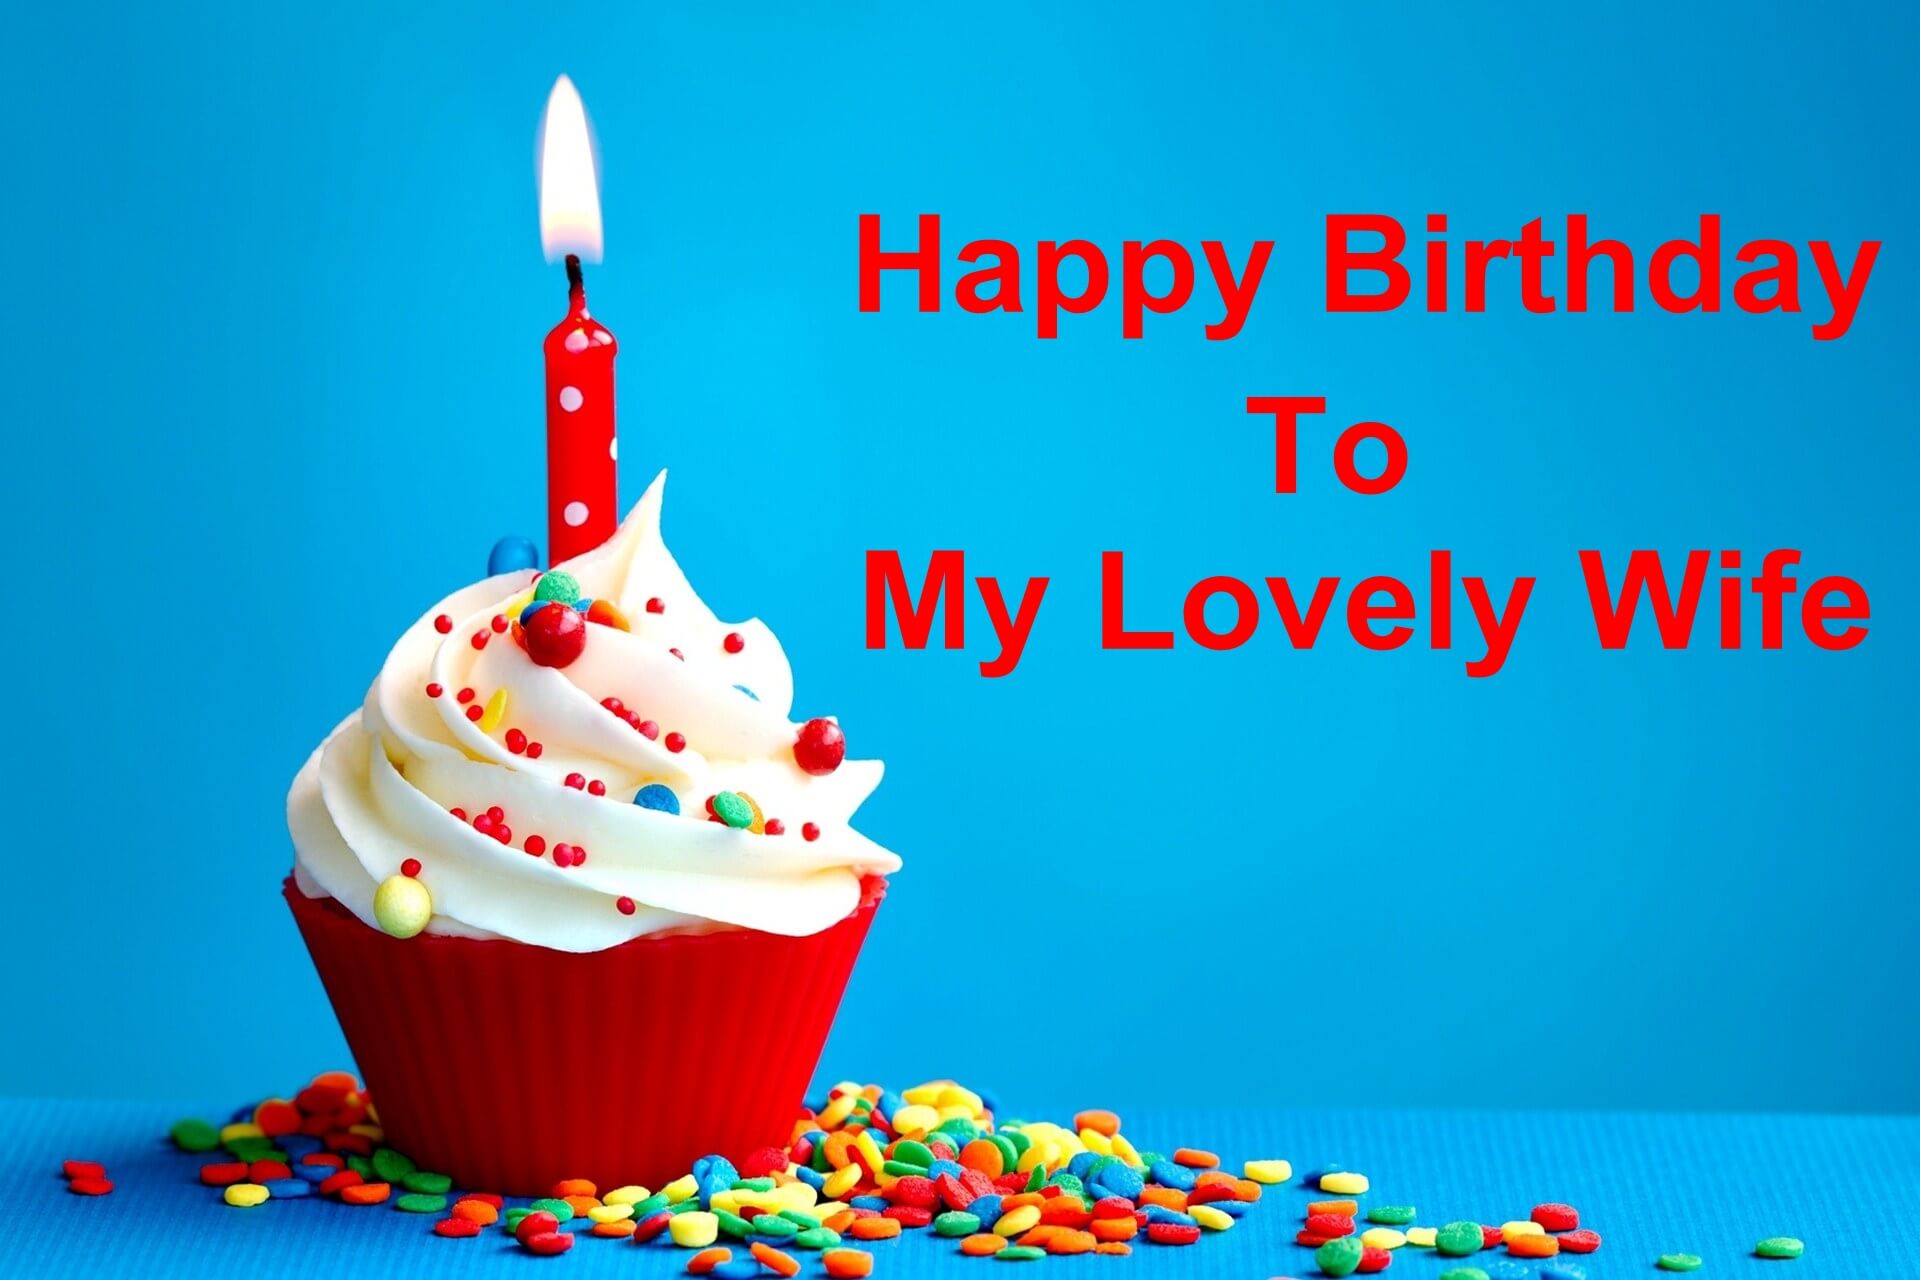 75+ Happy Birthday Wishes For Wife – Status, Quotes, Greeting Cards, Cake Images, Messages,